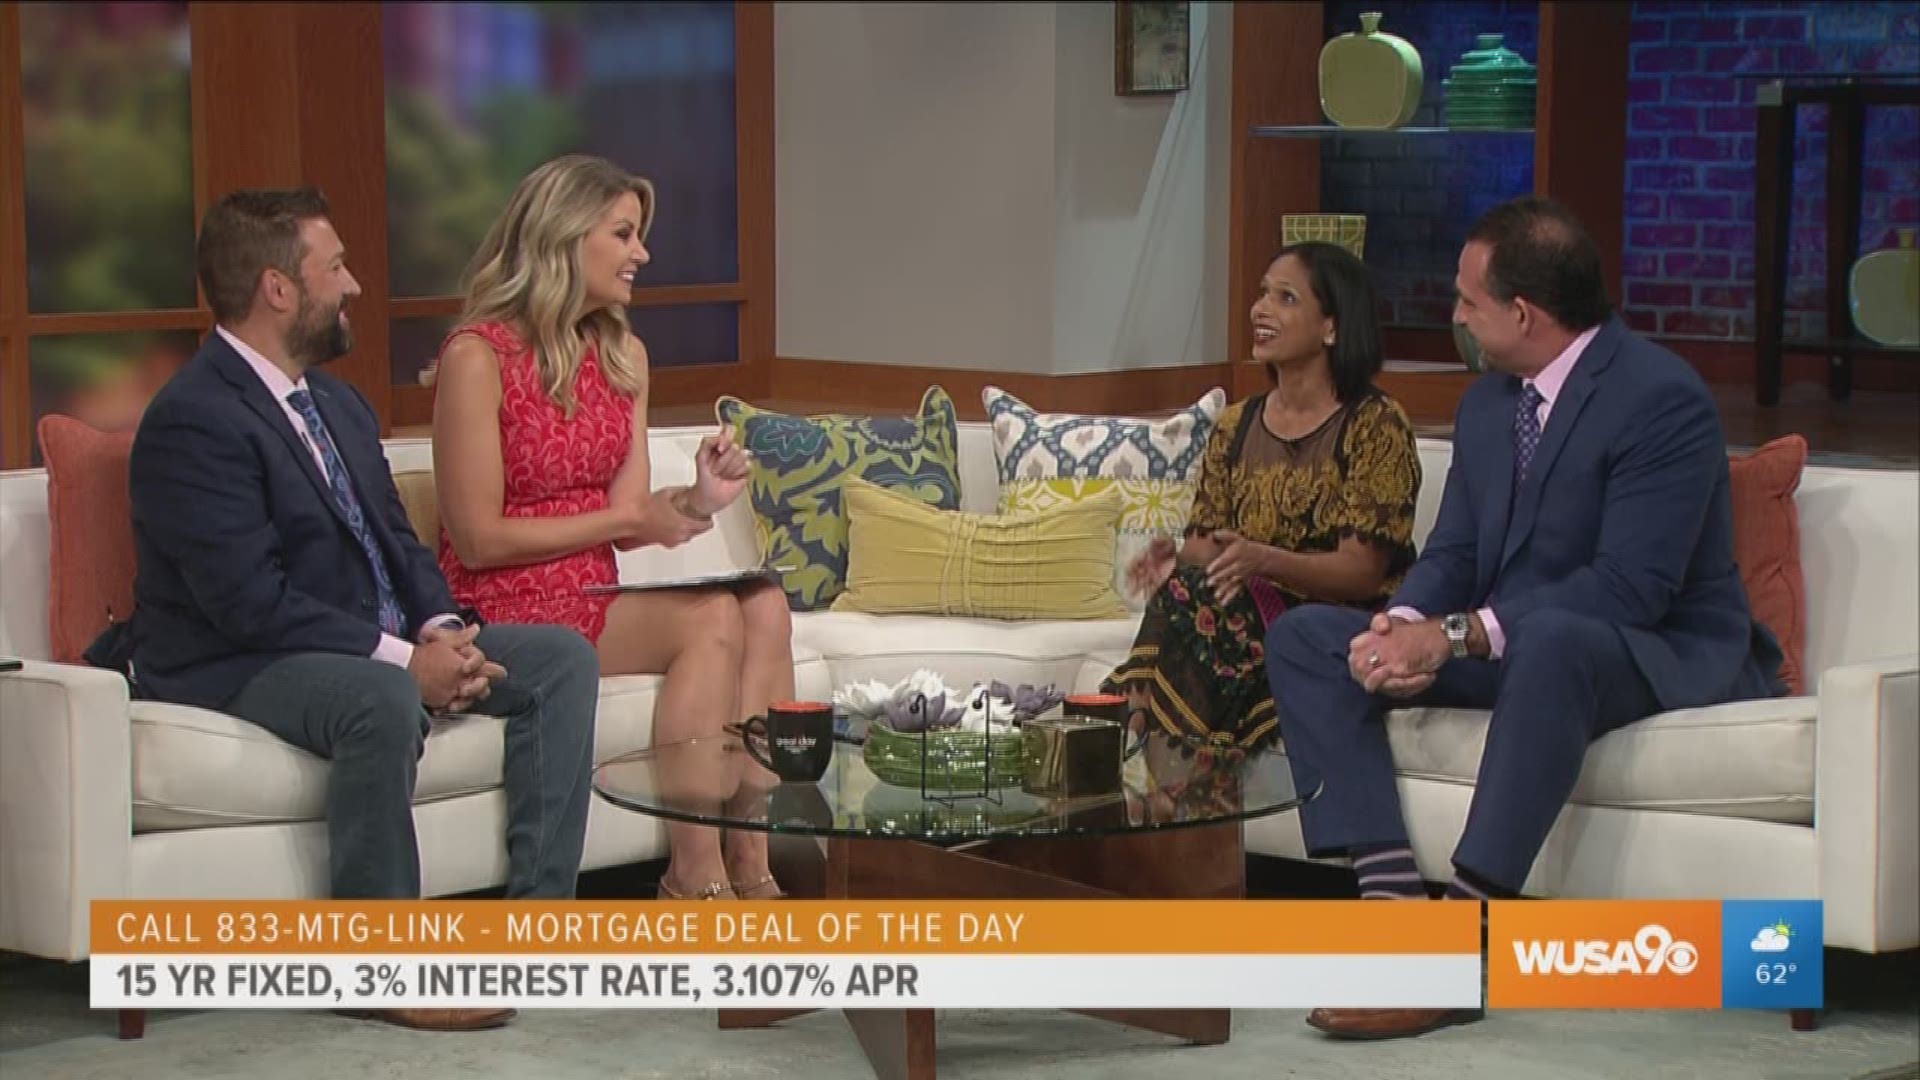 Saji Sebastian, Carey Riel and Josh Greene talk about the mortgage deal of the day! This segment was sponsored by Eastern Title & Settlement and Mortgage Link Inc.